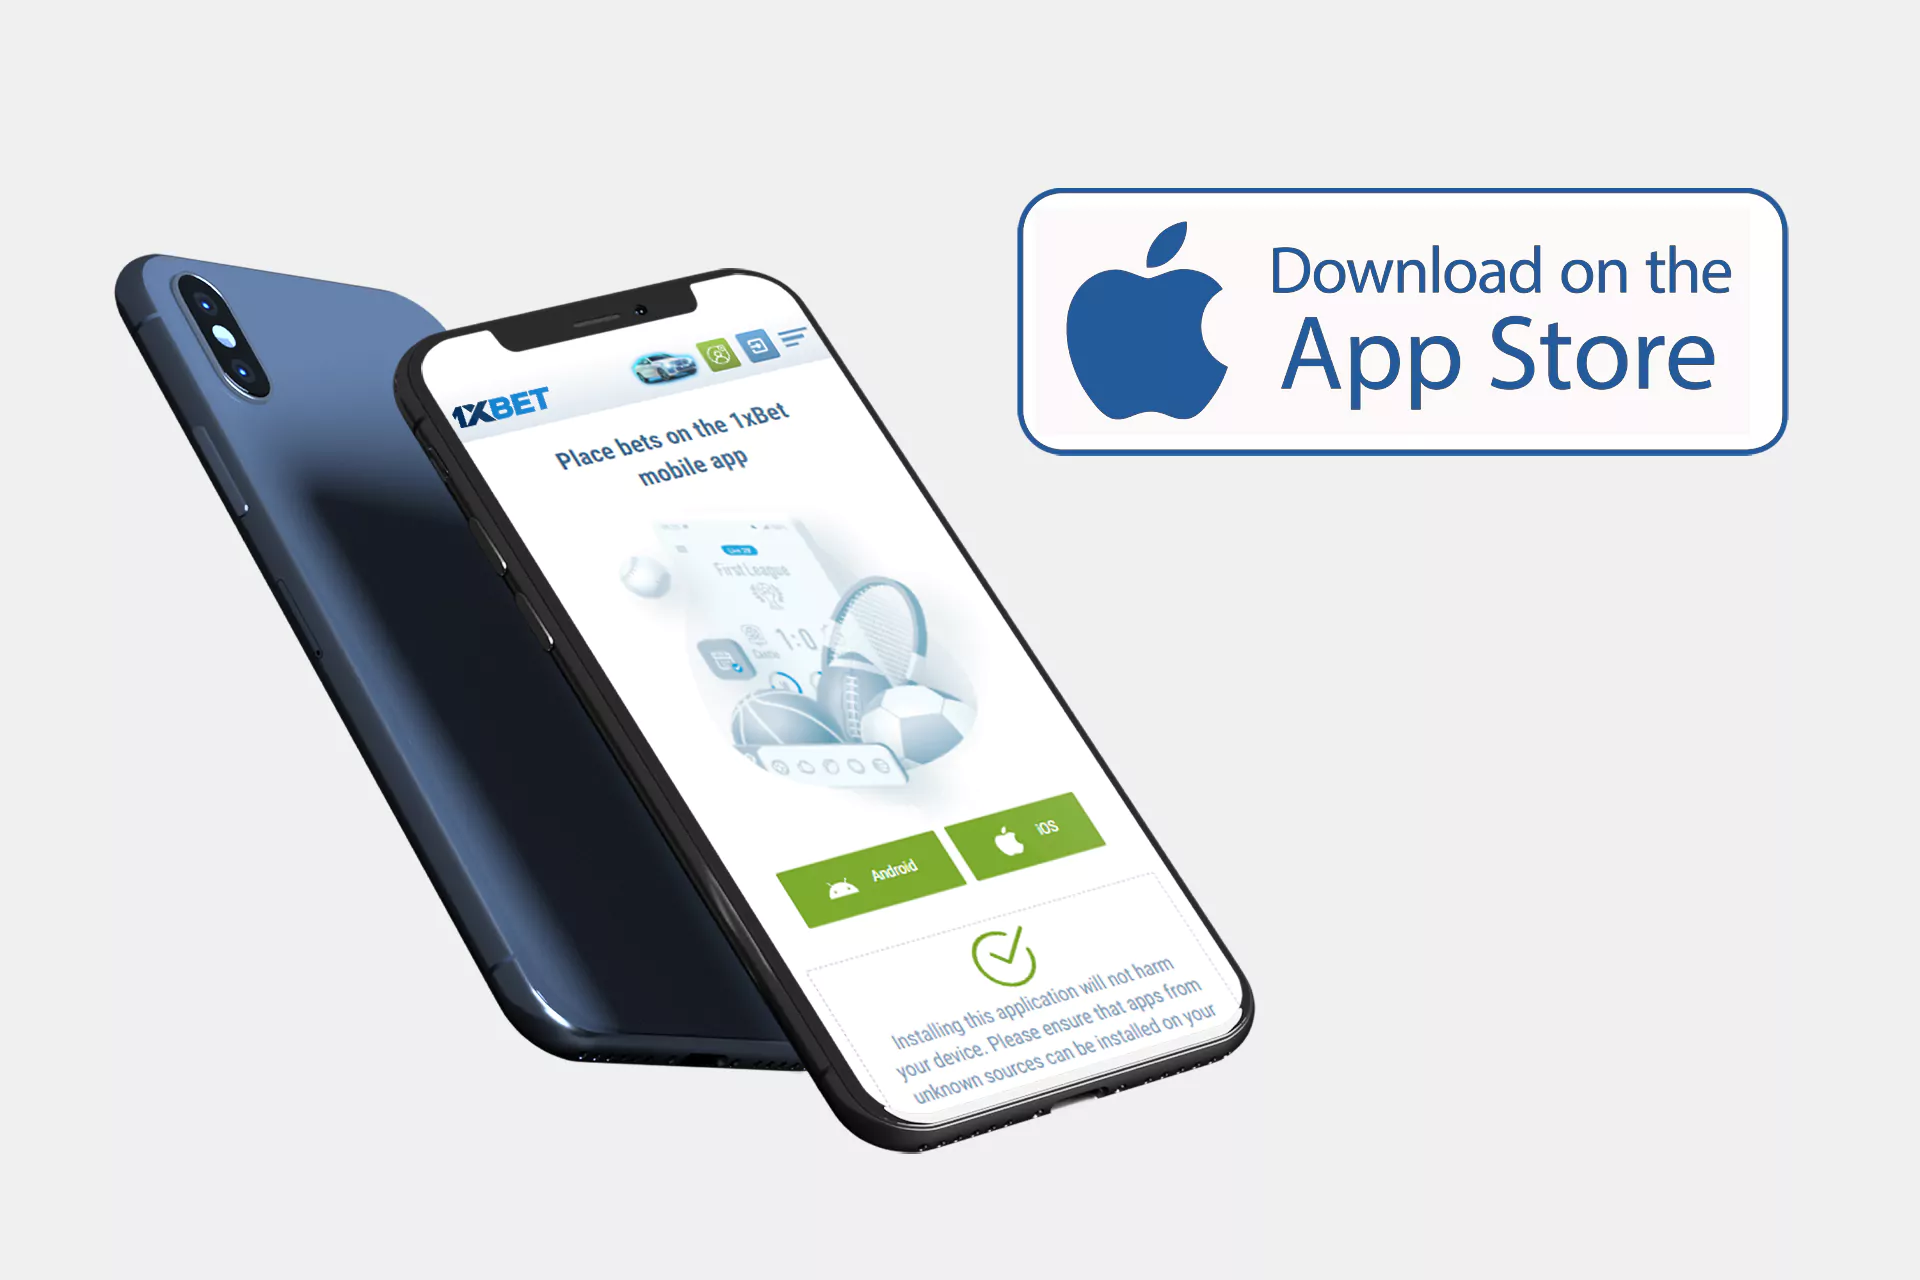 If you have an iPhone, download the iOS app on the App Store.